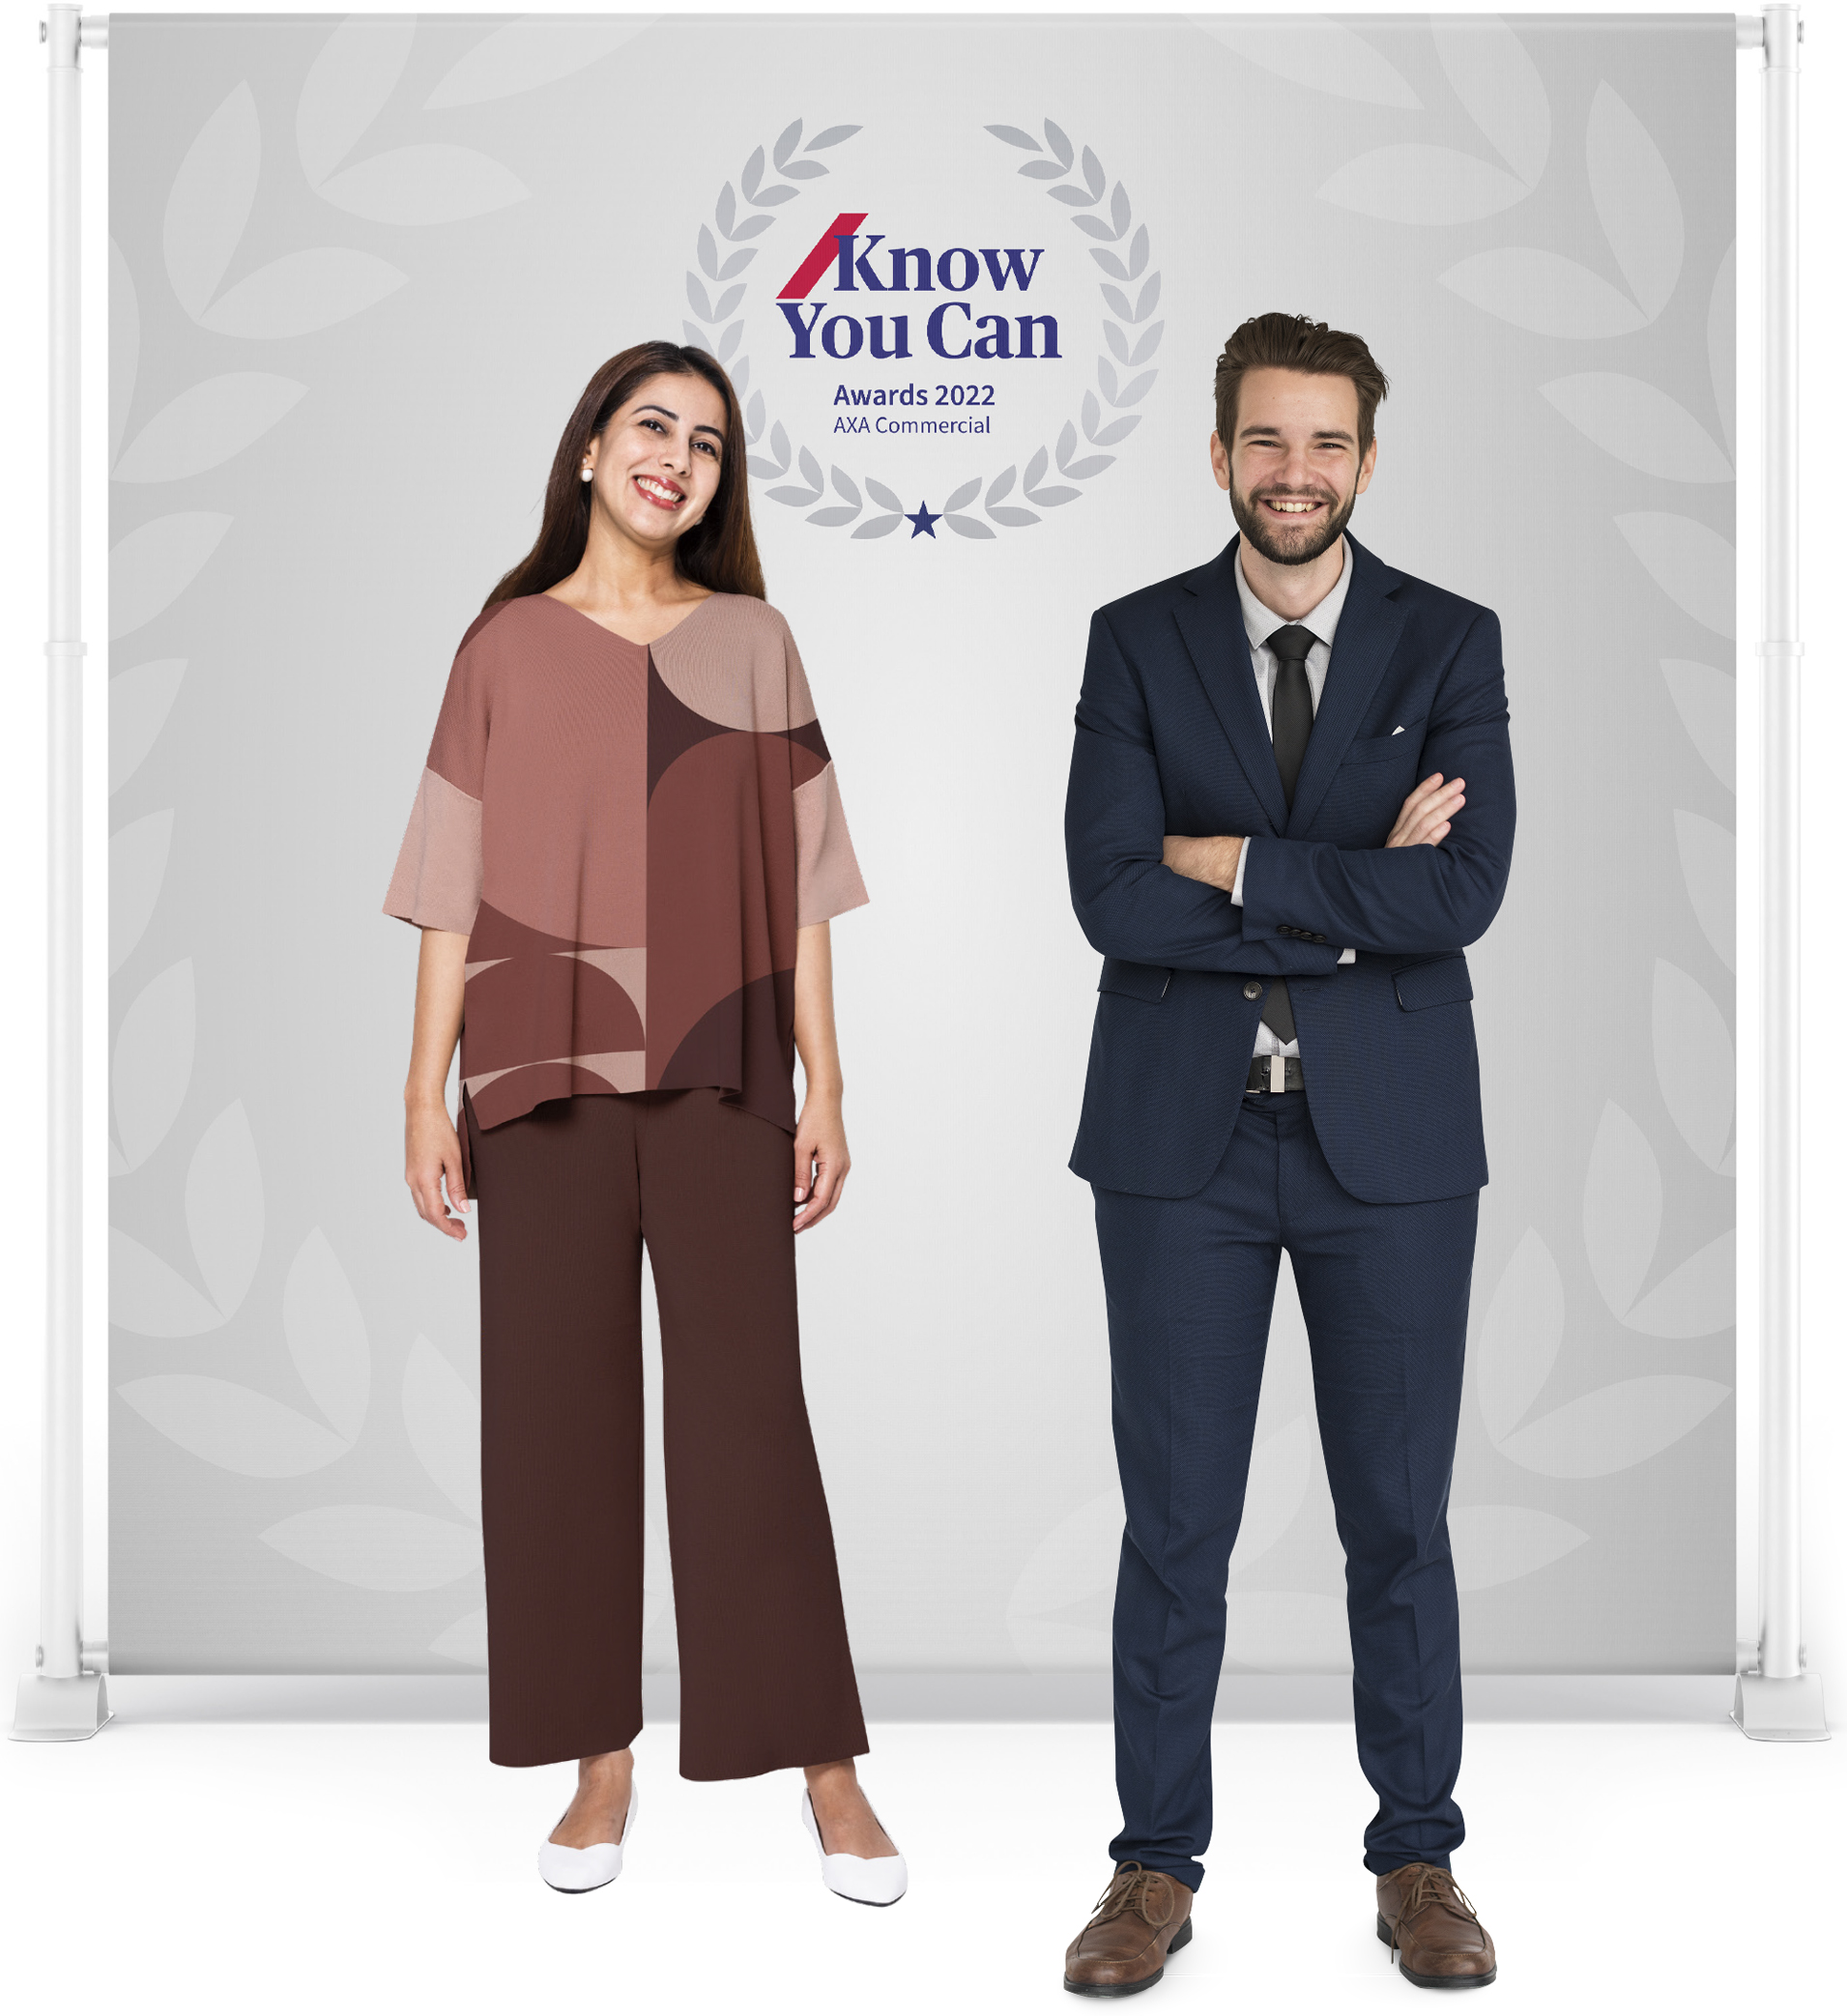 Know You Can Awards 2022 – photo backdrop